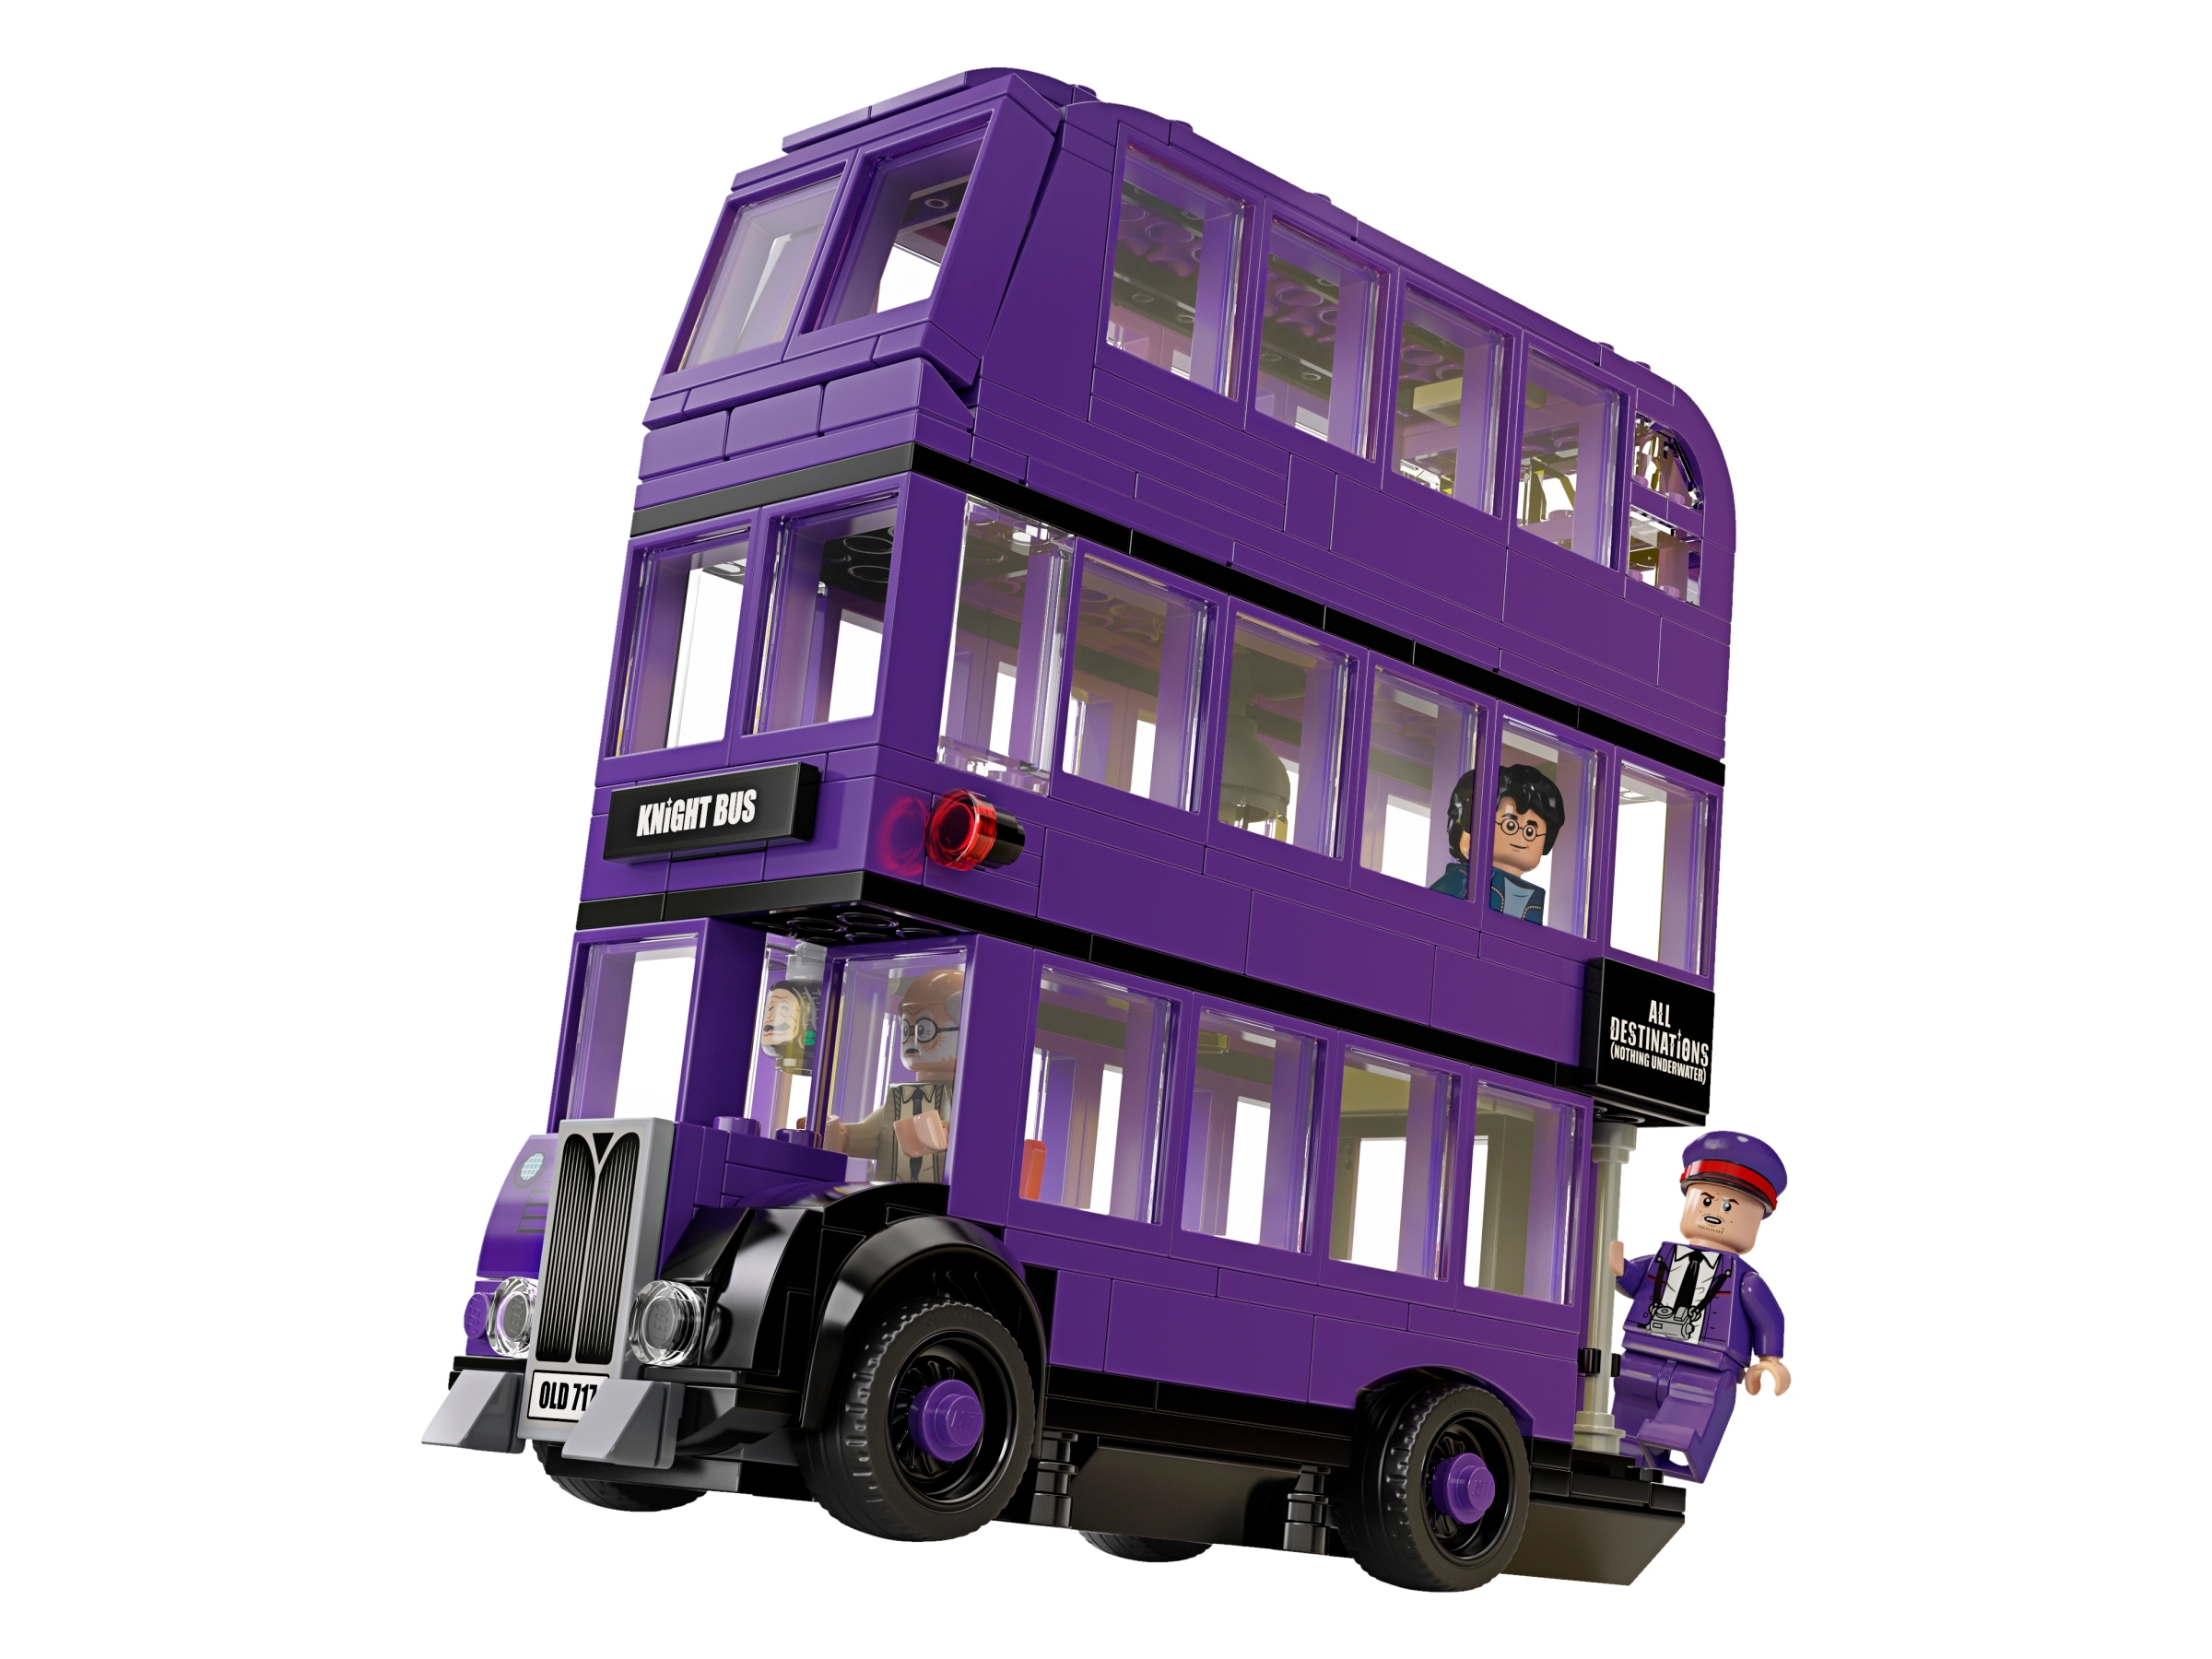 lego harry potter knight bus polybag